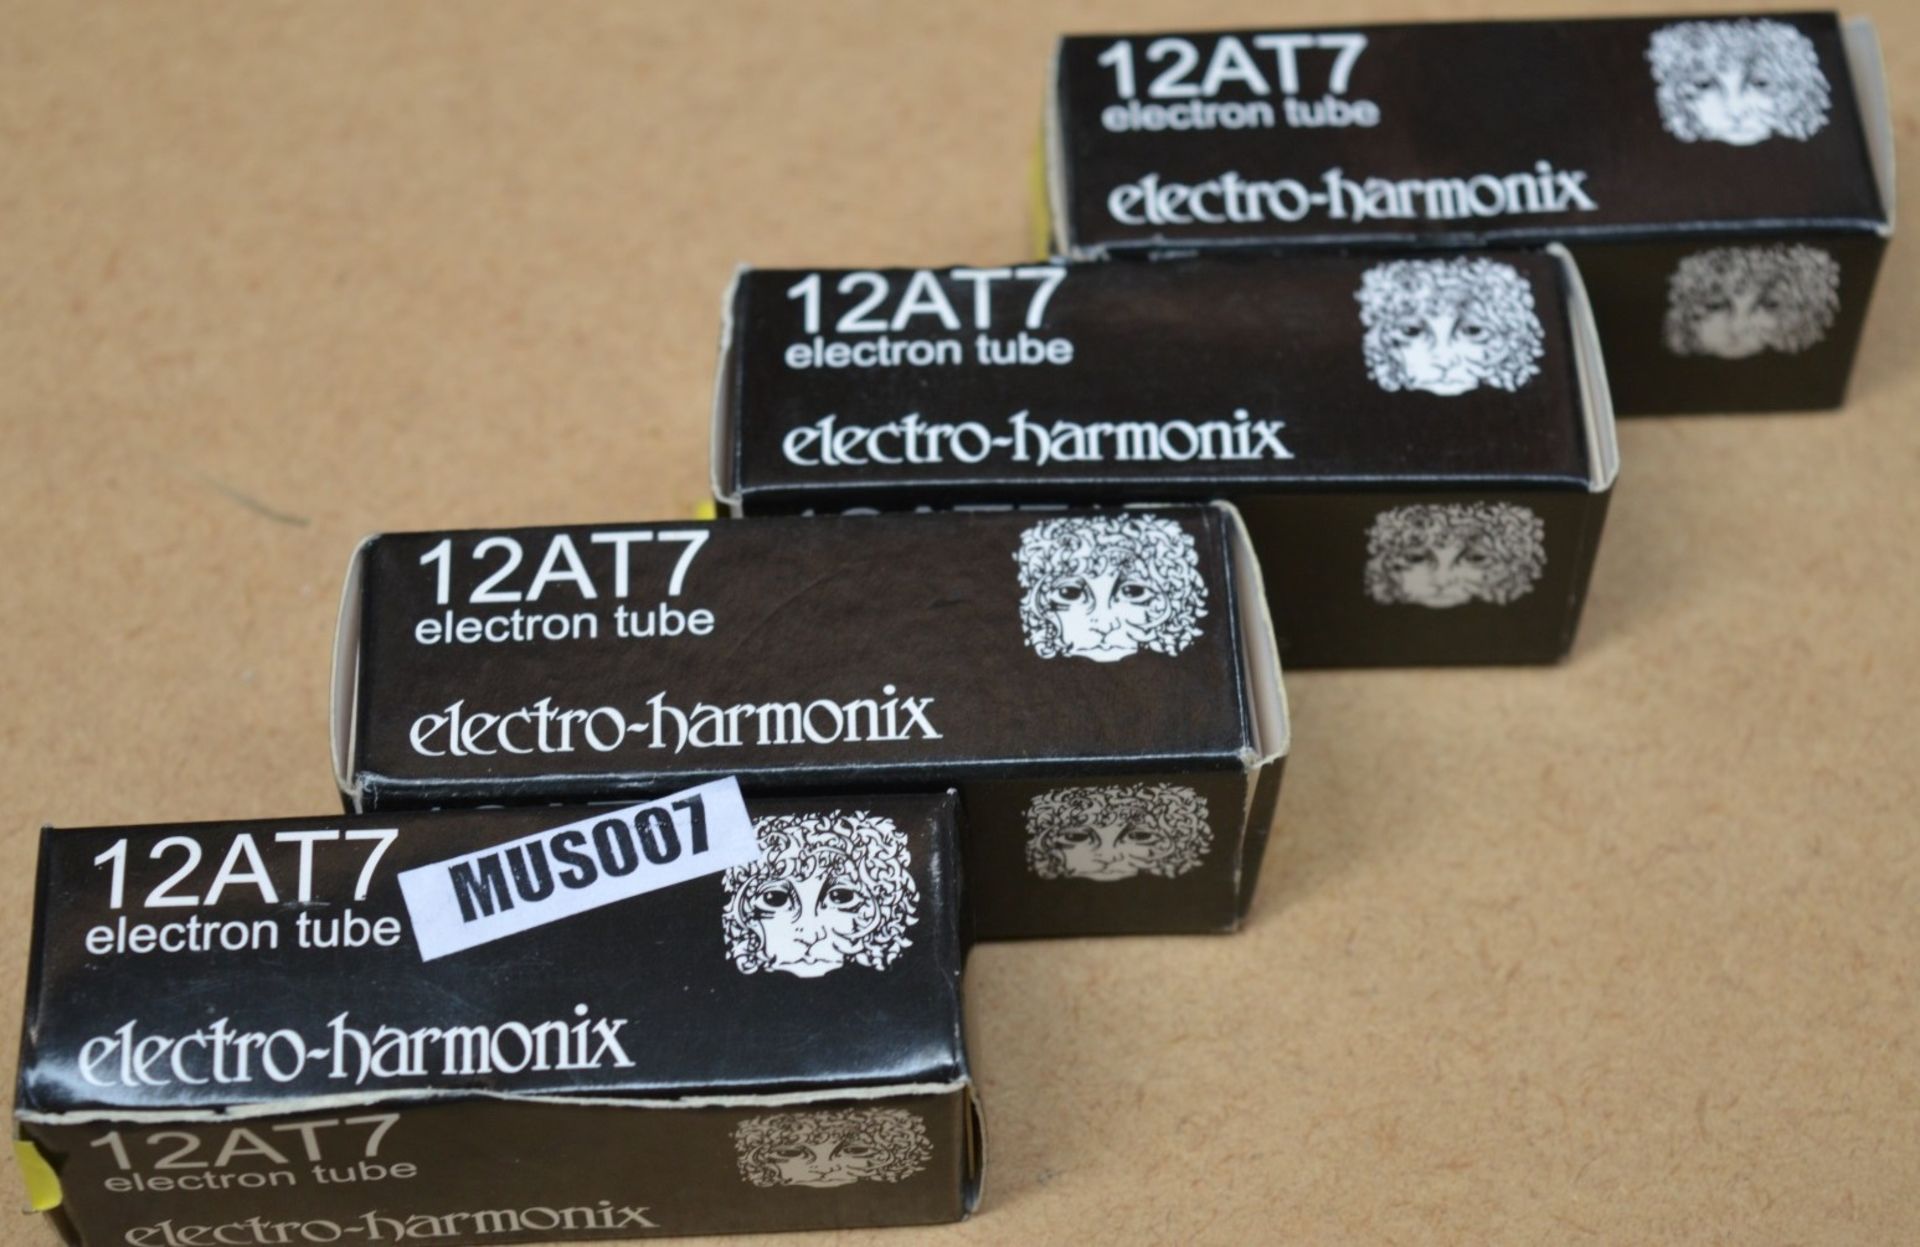 3 x Electro Harmonix 12AT7 Power Tube Amp Valves - New Boxed Stock - CL020 - Ref Mus007 -